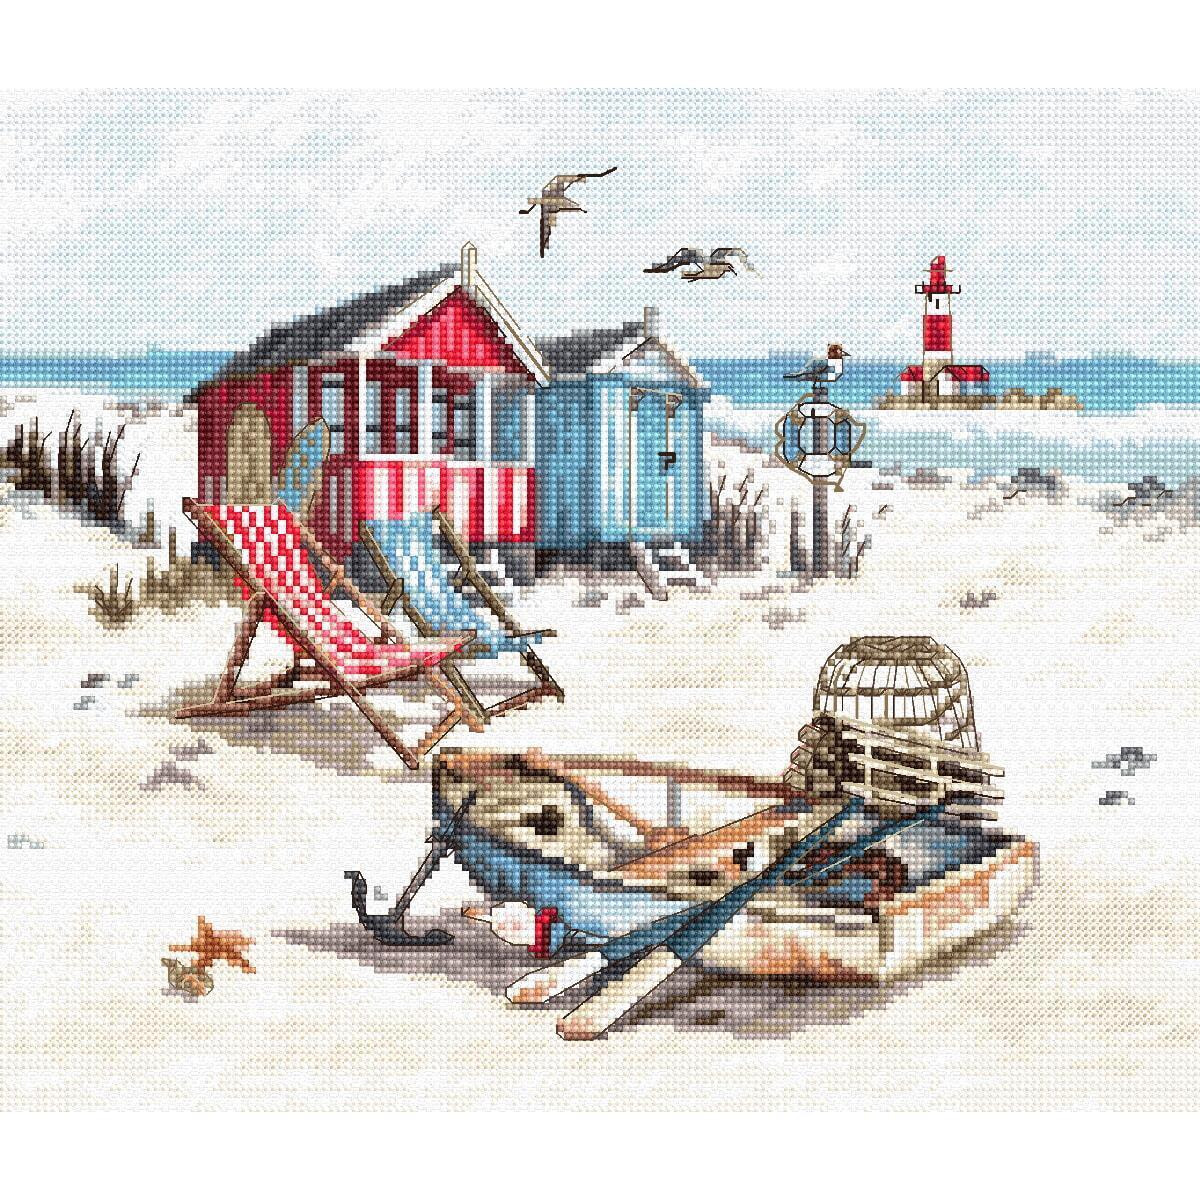 Letistitch counted cross stitch kit "Beach",...